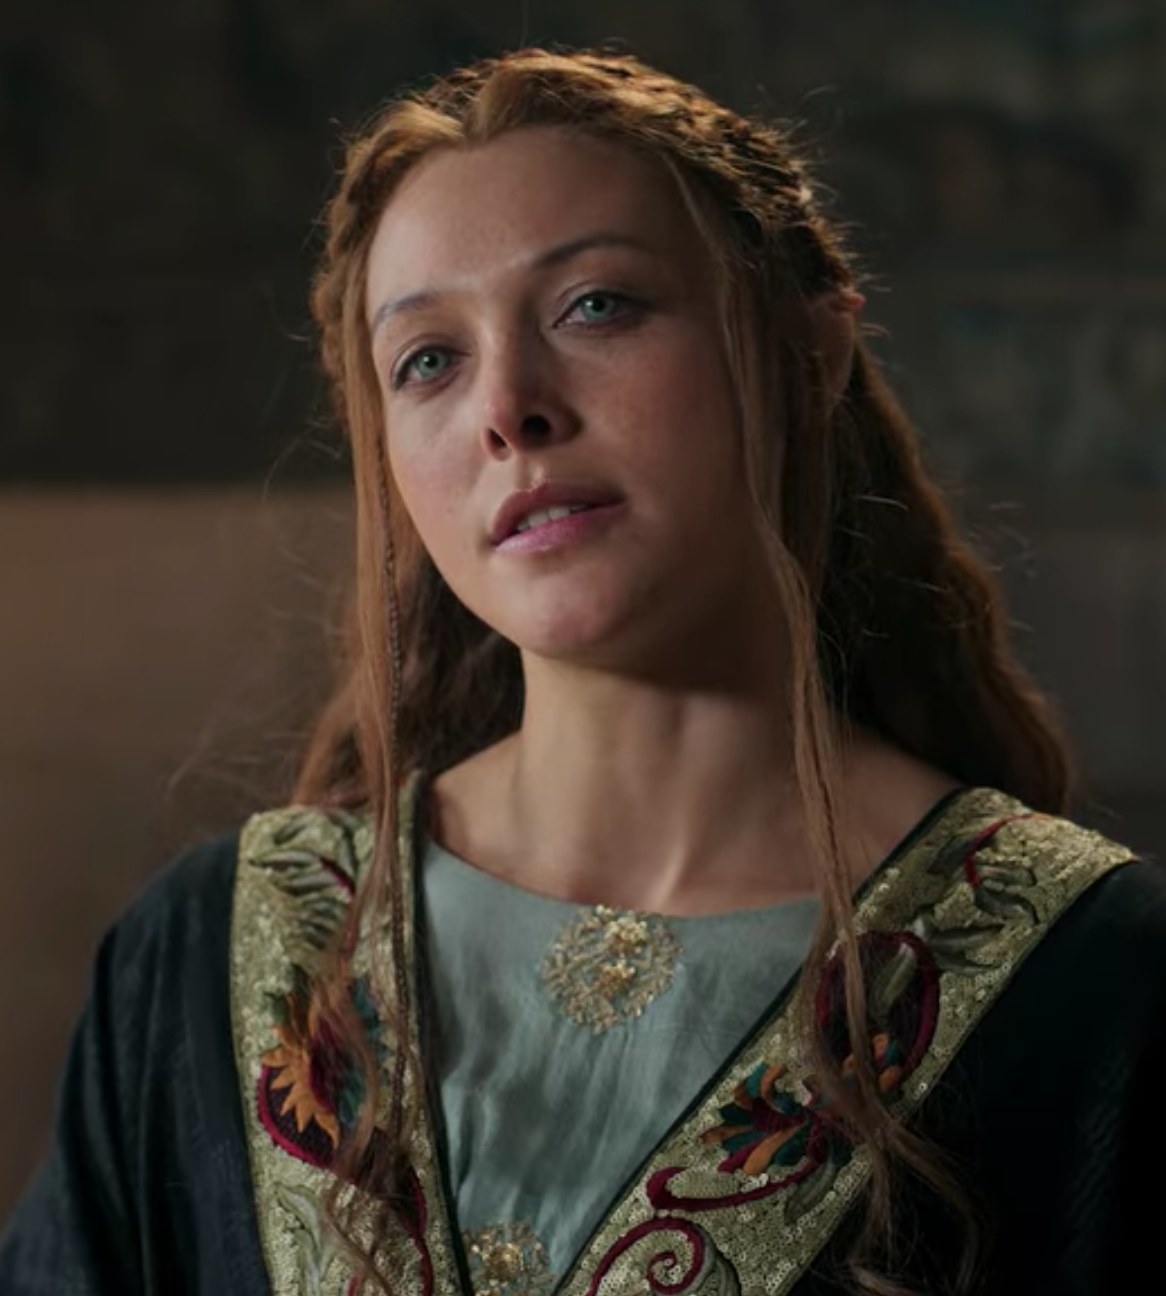 Mecia Simson as sorceress Francesca Findabair in Season 2 of &quot;The Witcher&quot;